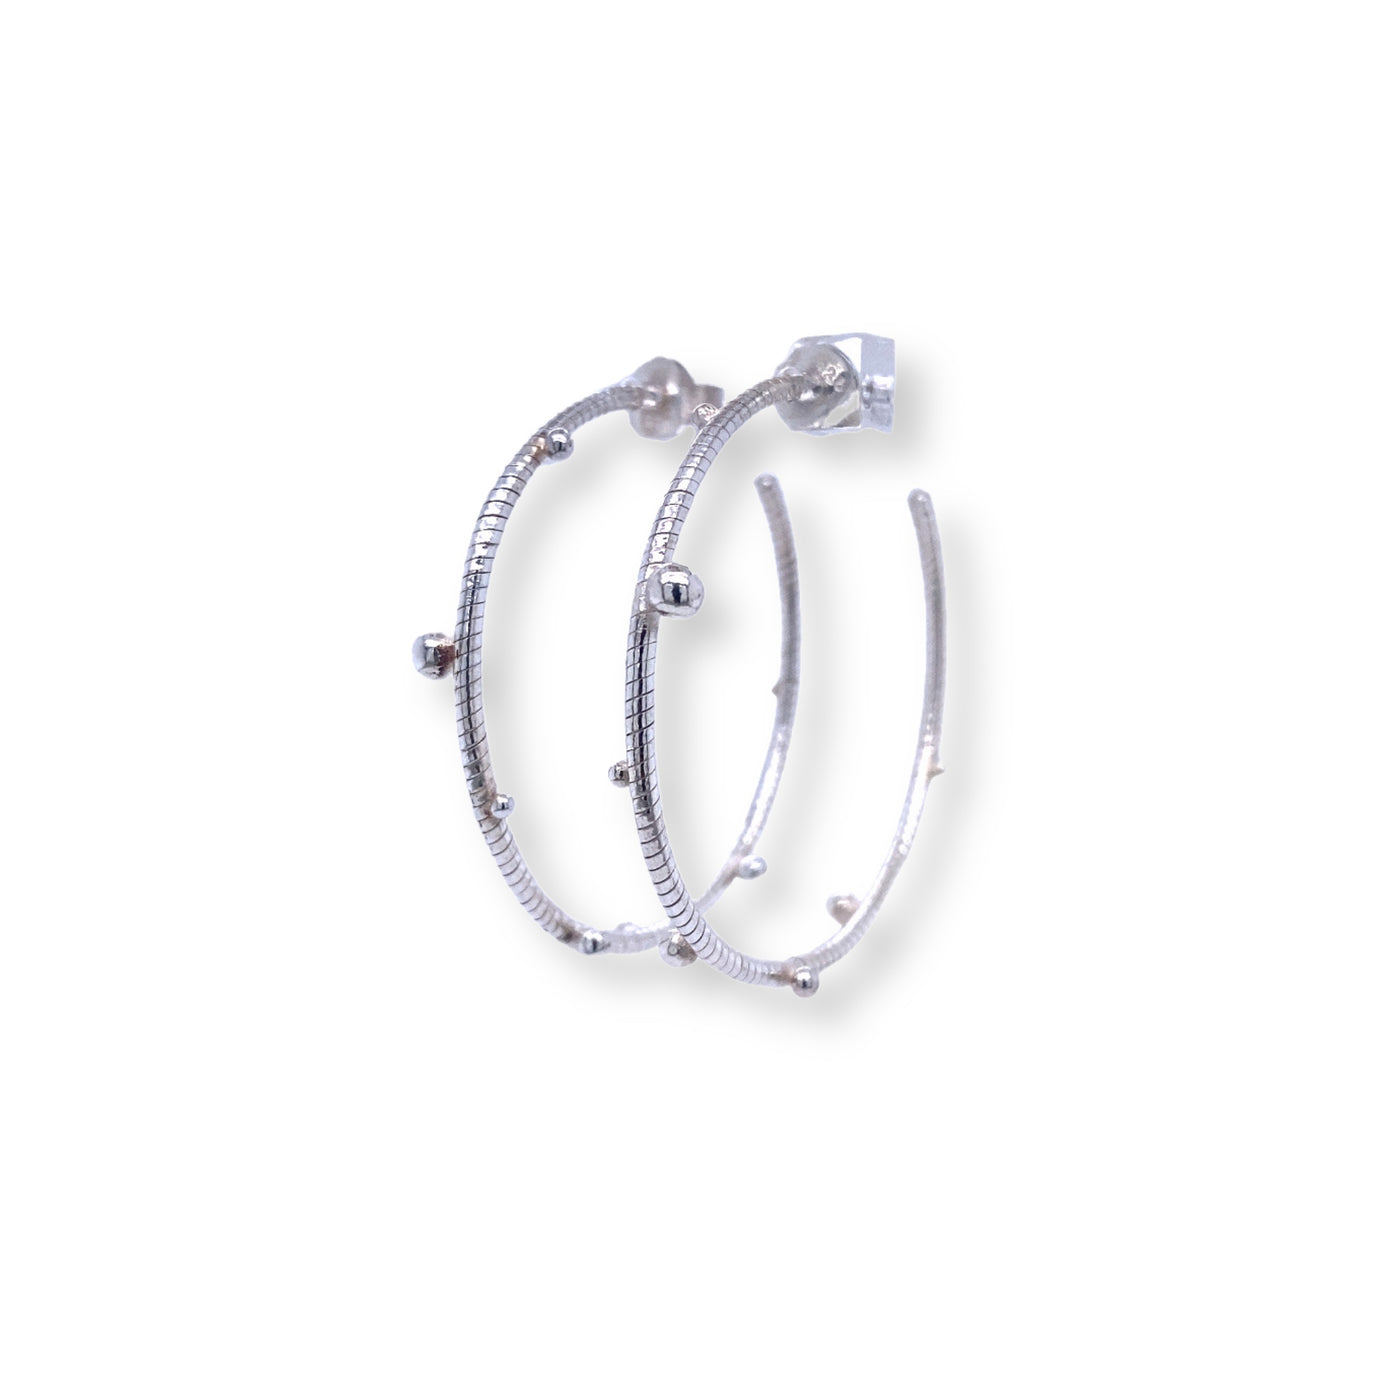 Sterling silver textured hoops featuring silver dots